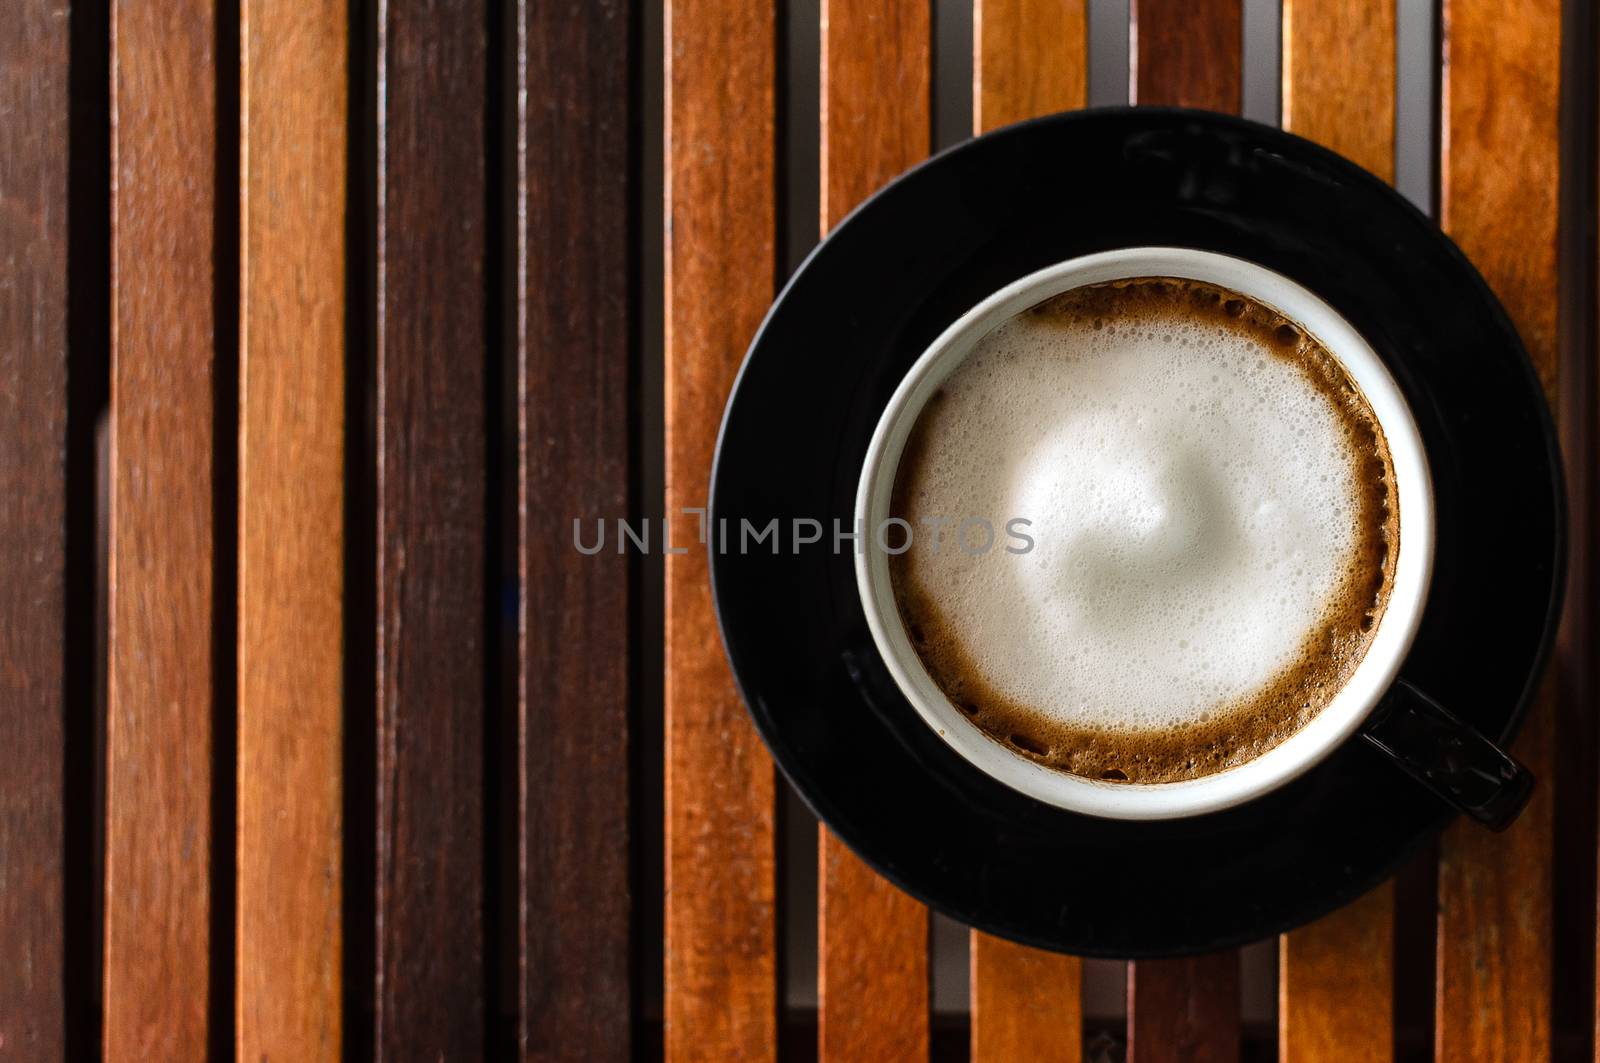 A Cup of Cappuccino Coffee on the horaizontal line brown wood table and ready to served and enjoy drink in the relaxing time with copy space.